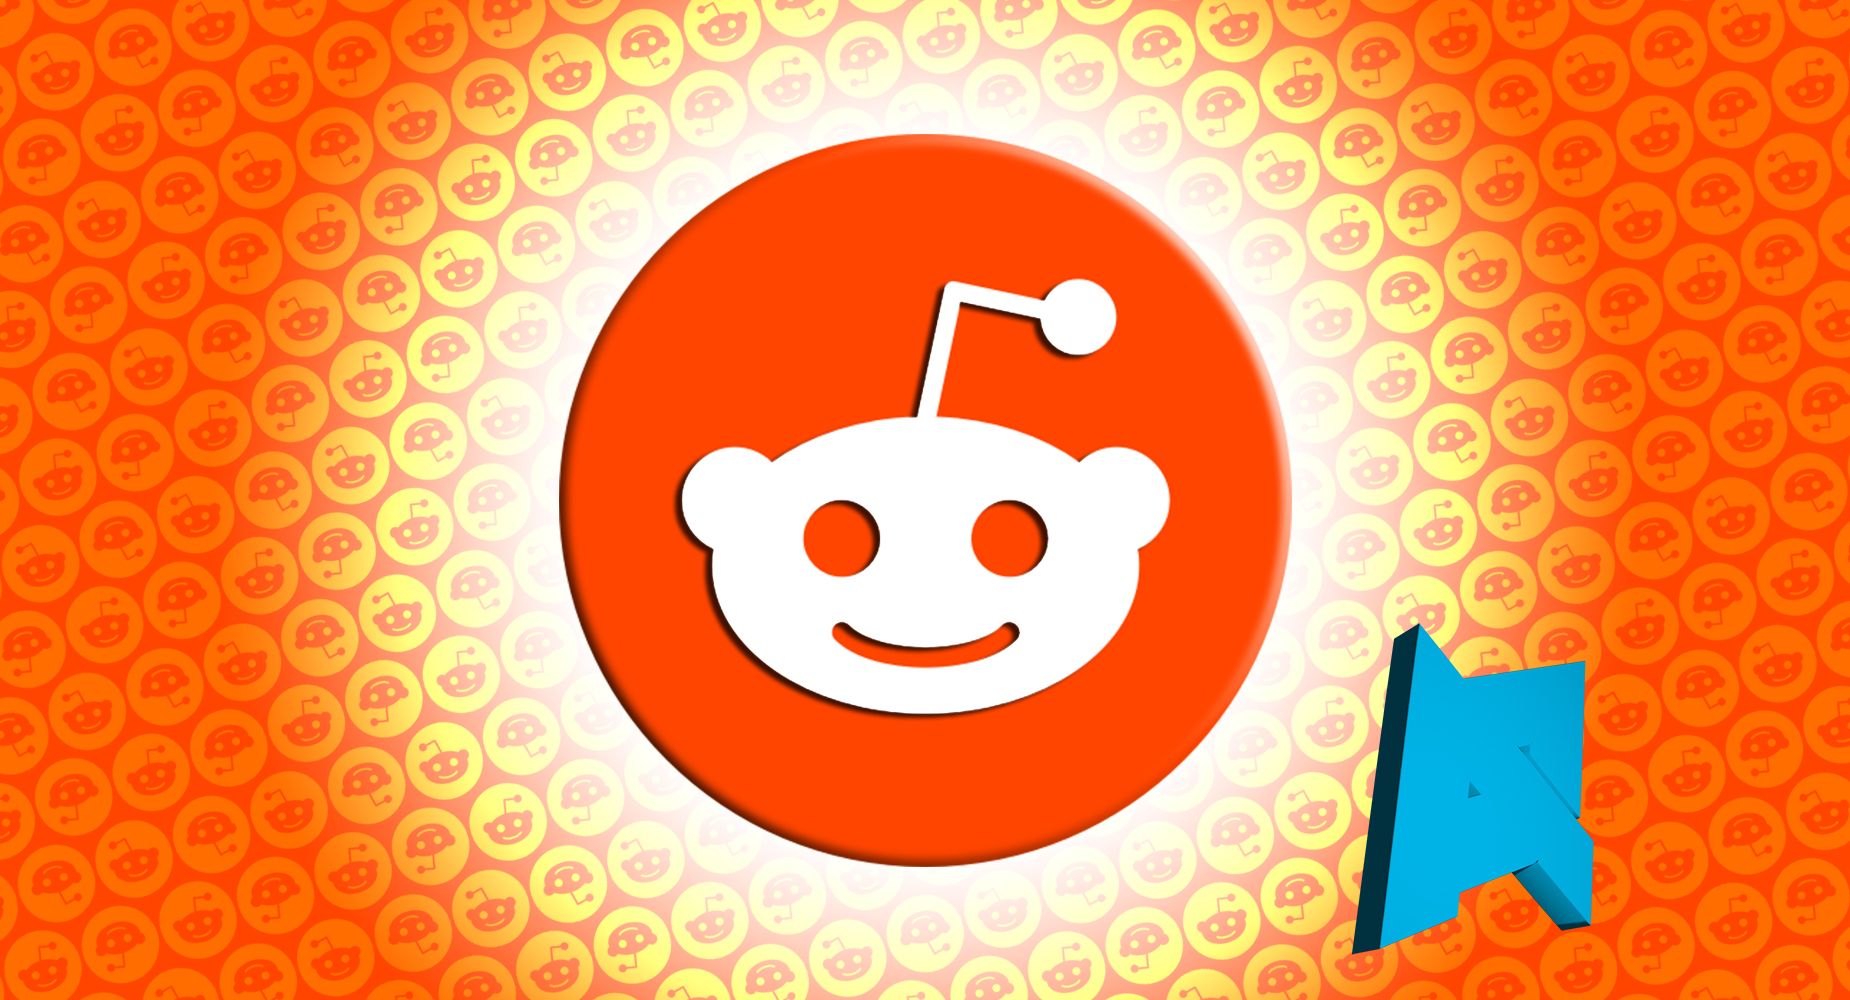 The Reddit app is giving comments some long-overdue attention